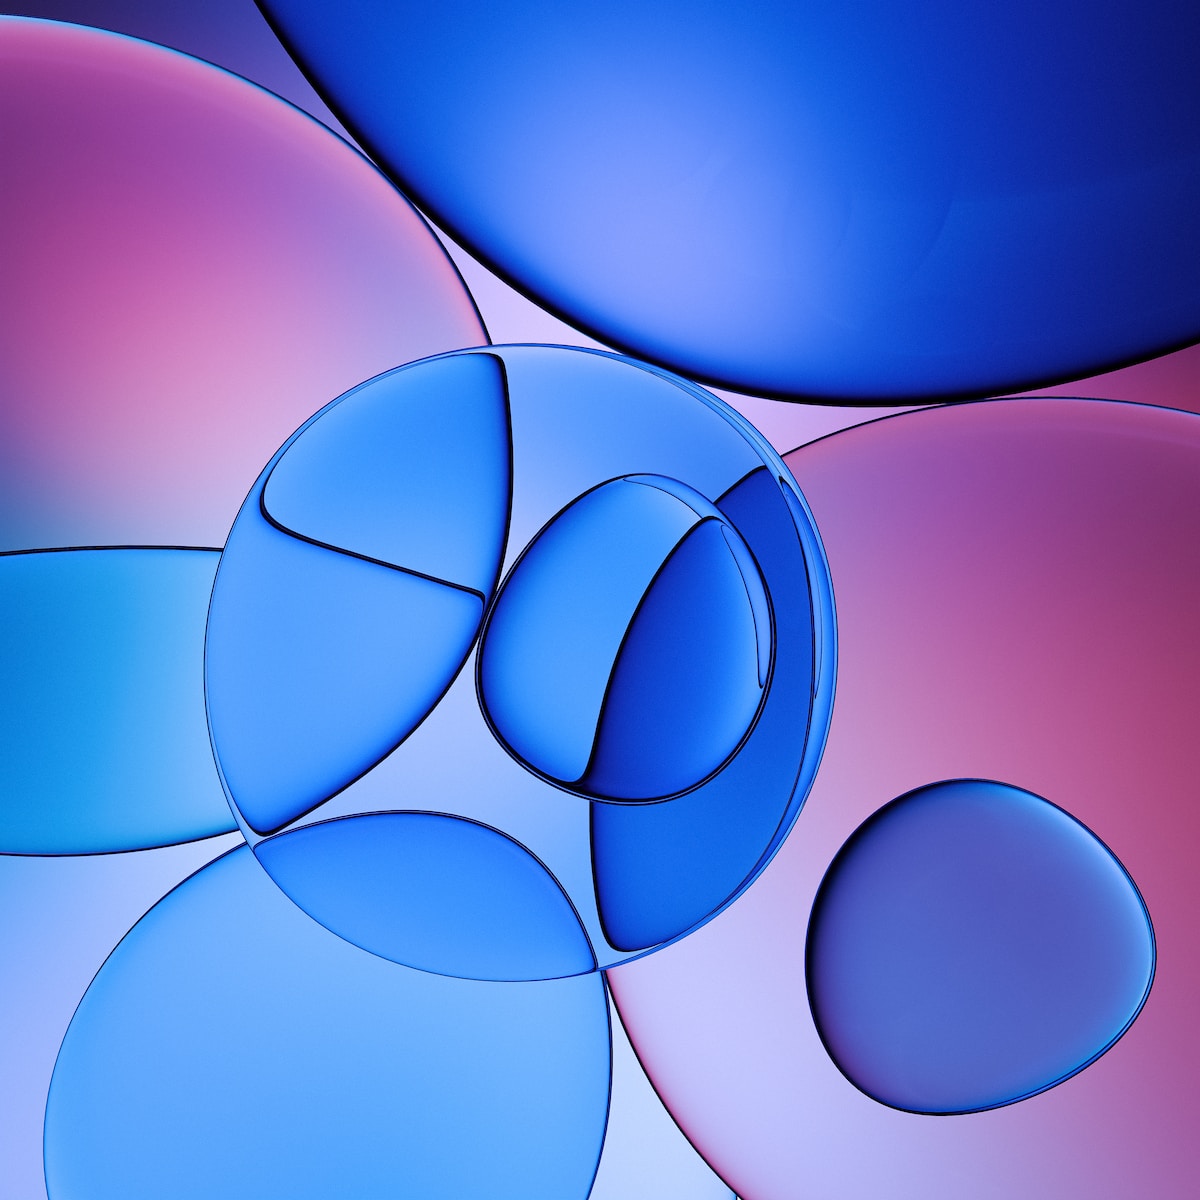 an abstract blue and pink background with circles